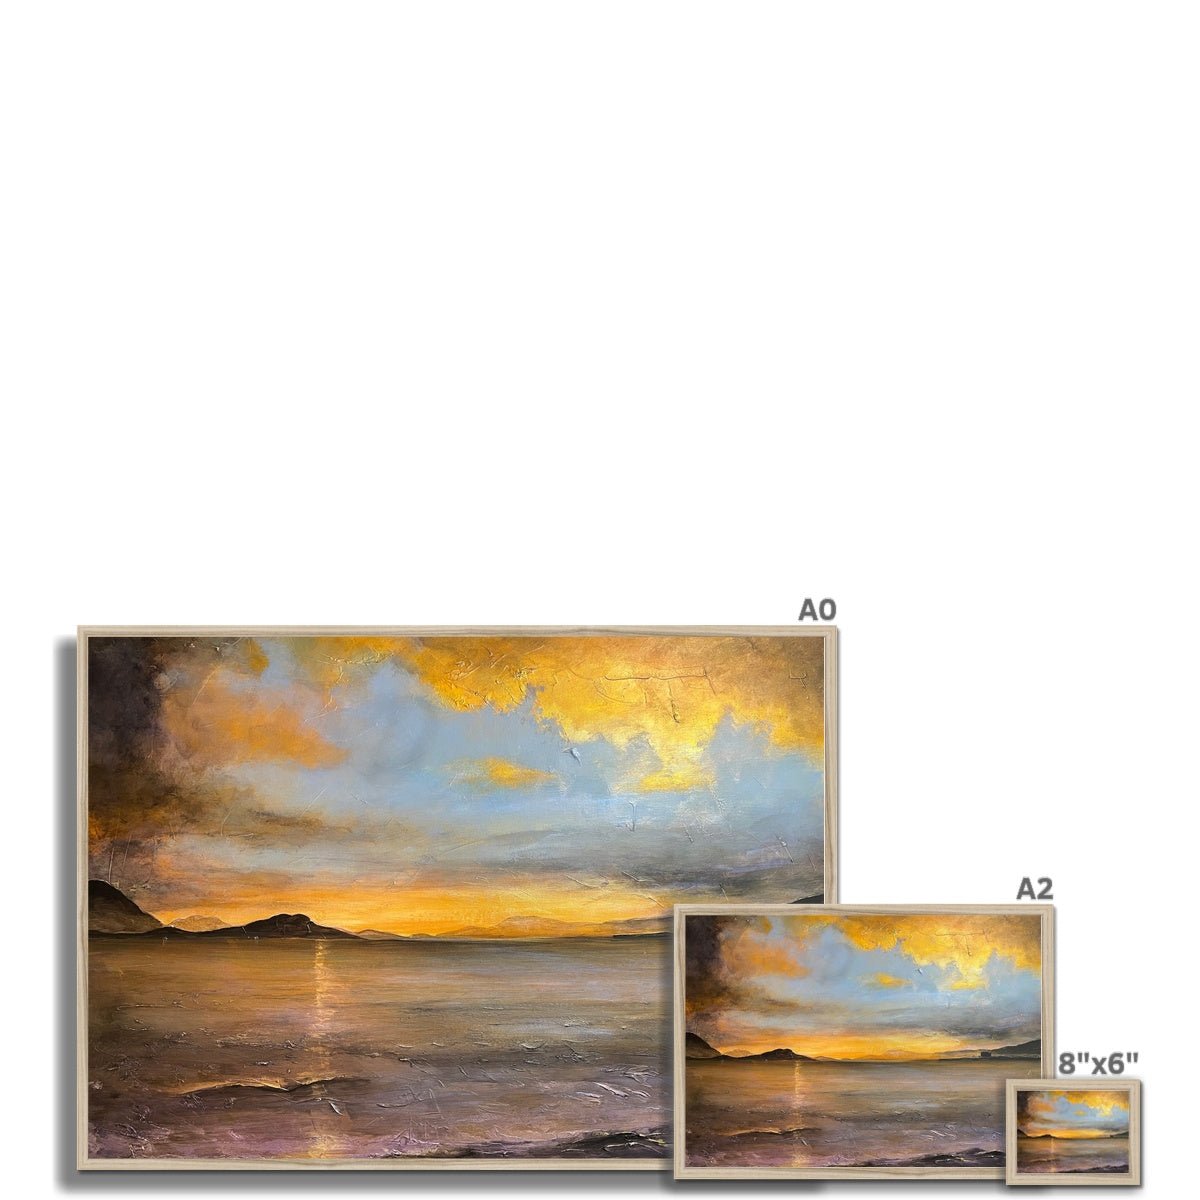 Loch Linnhe Sunset Painting | Framed Prints From Scotland-Framed Prints-Scottish Lochs & Mountains Art Gallery-Paintings, Prints, Homeware, Art Gifts From Scotland By Scottish Artist Kevin Hunter